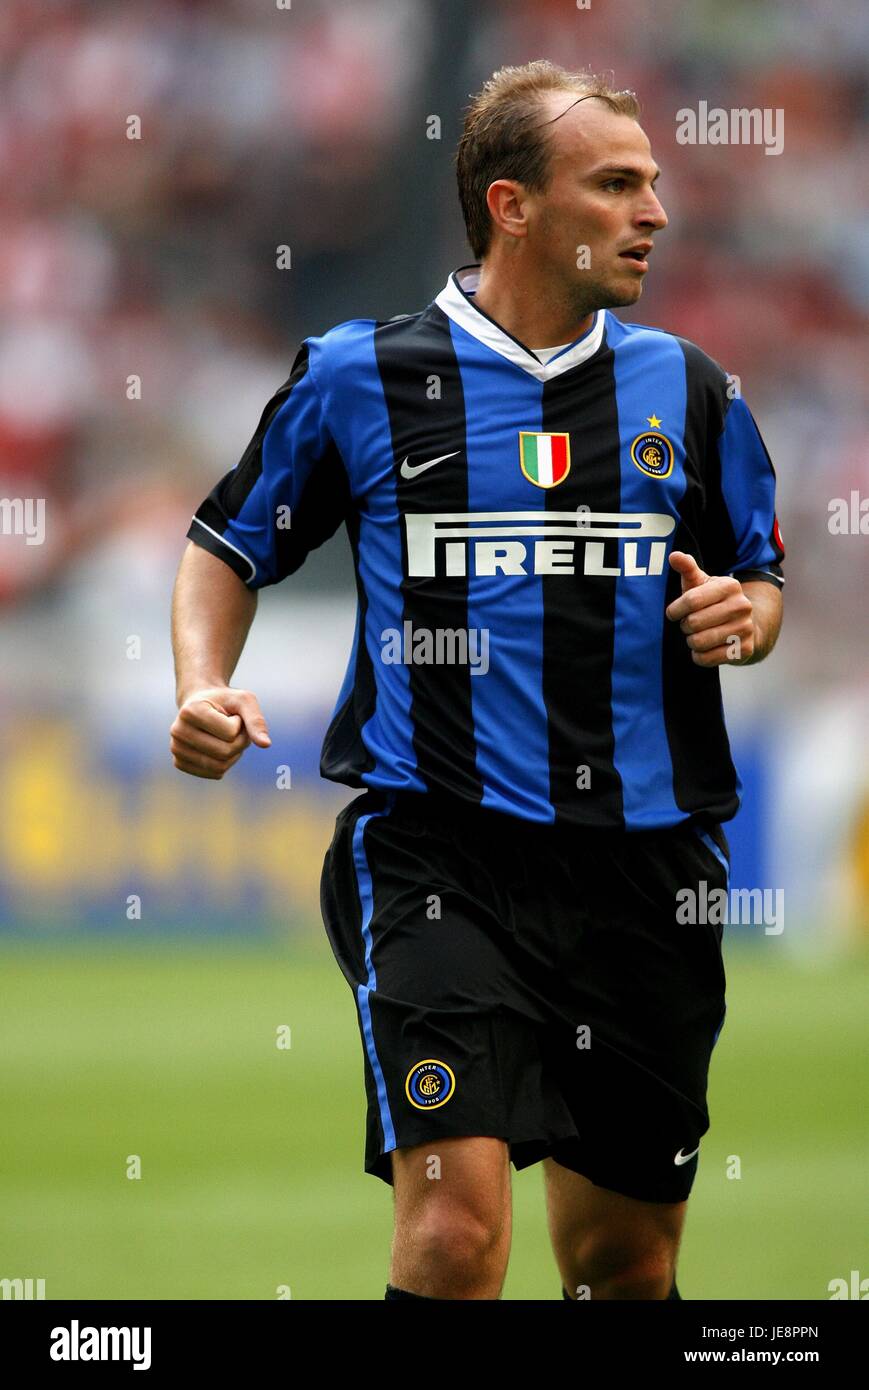 Cambiasso inter stock photography and images -